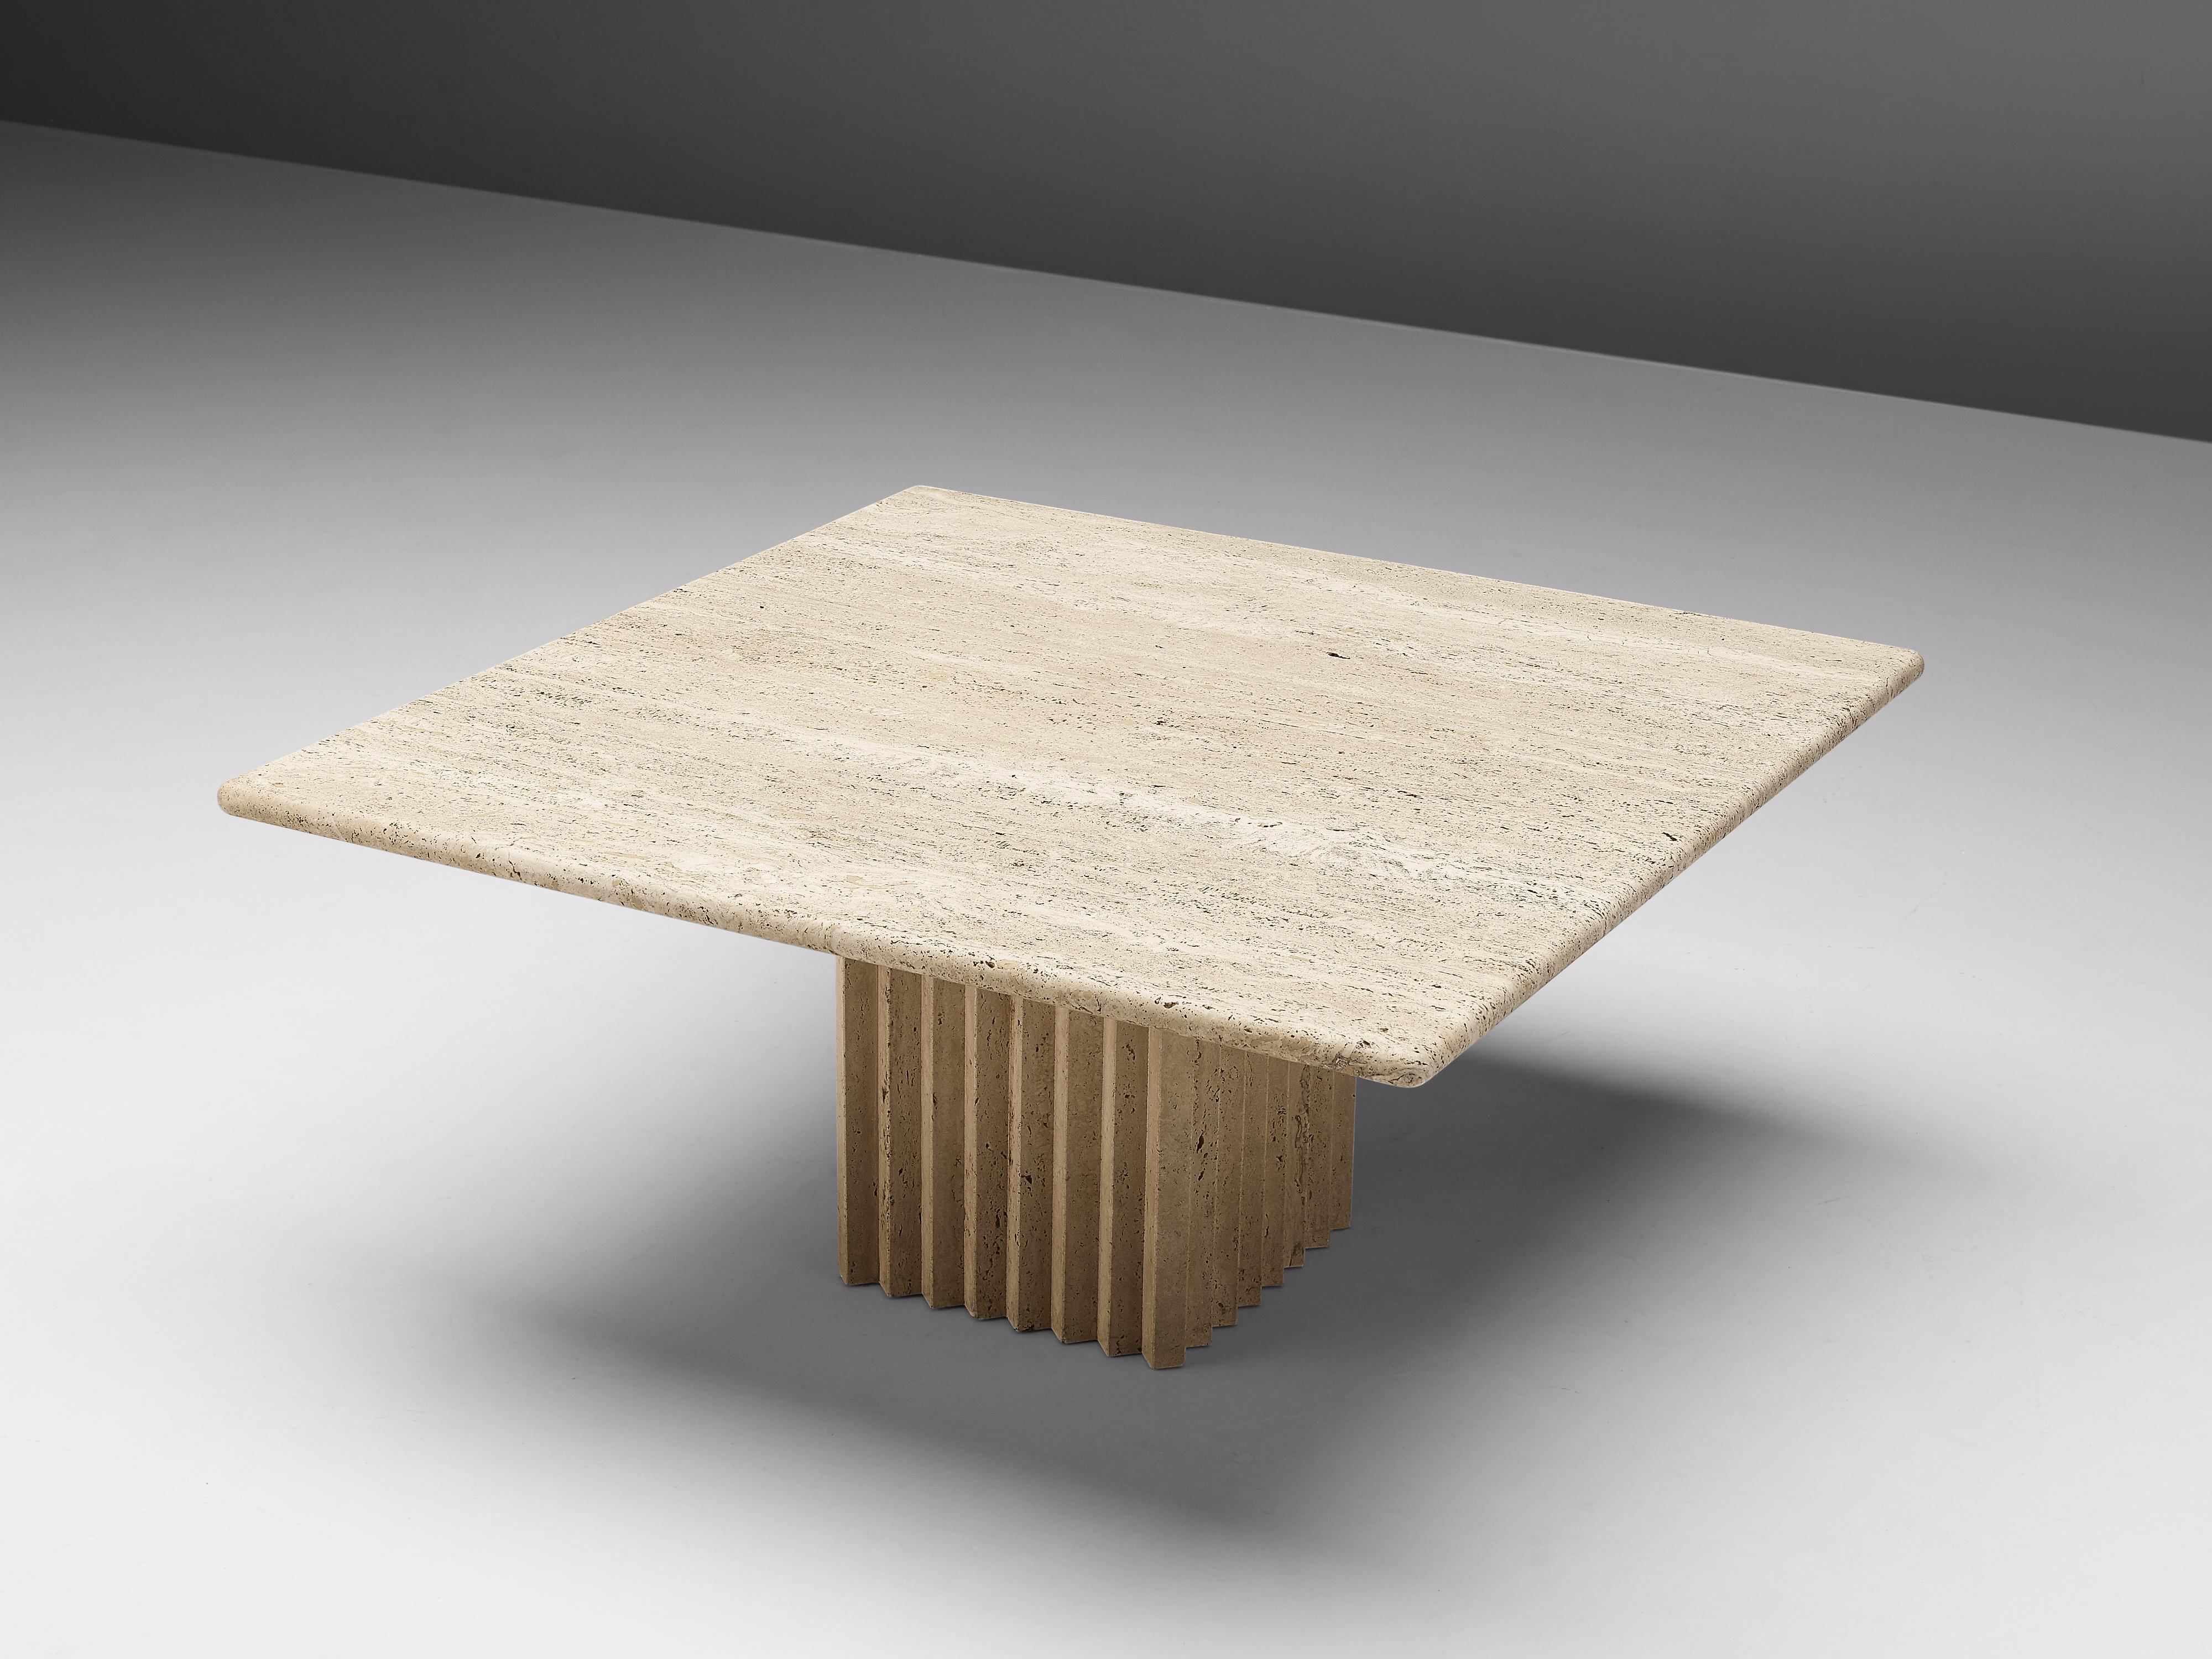 Coffee table, travertine, Italy, 1970s.

Coffee table with travertine rectangular tabletop and base. The base is structured by a fluted relief in vertical lines. The bright travertine gives the table a sculptural look. The natural layers of the